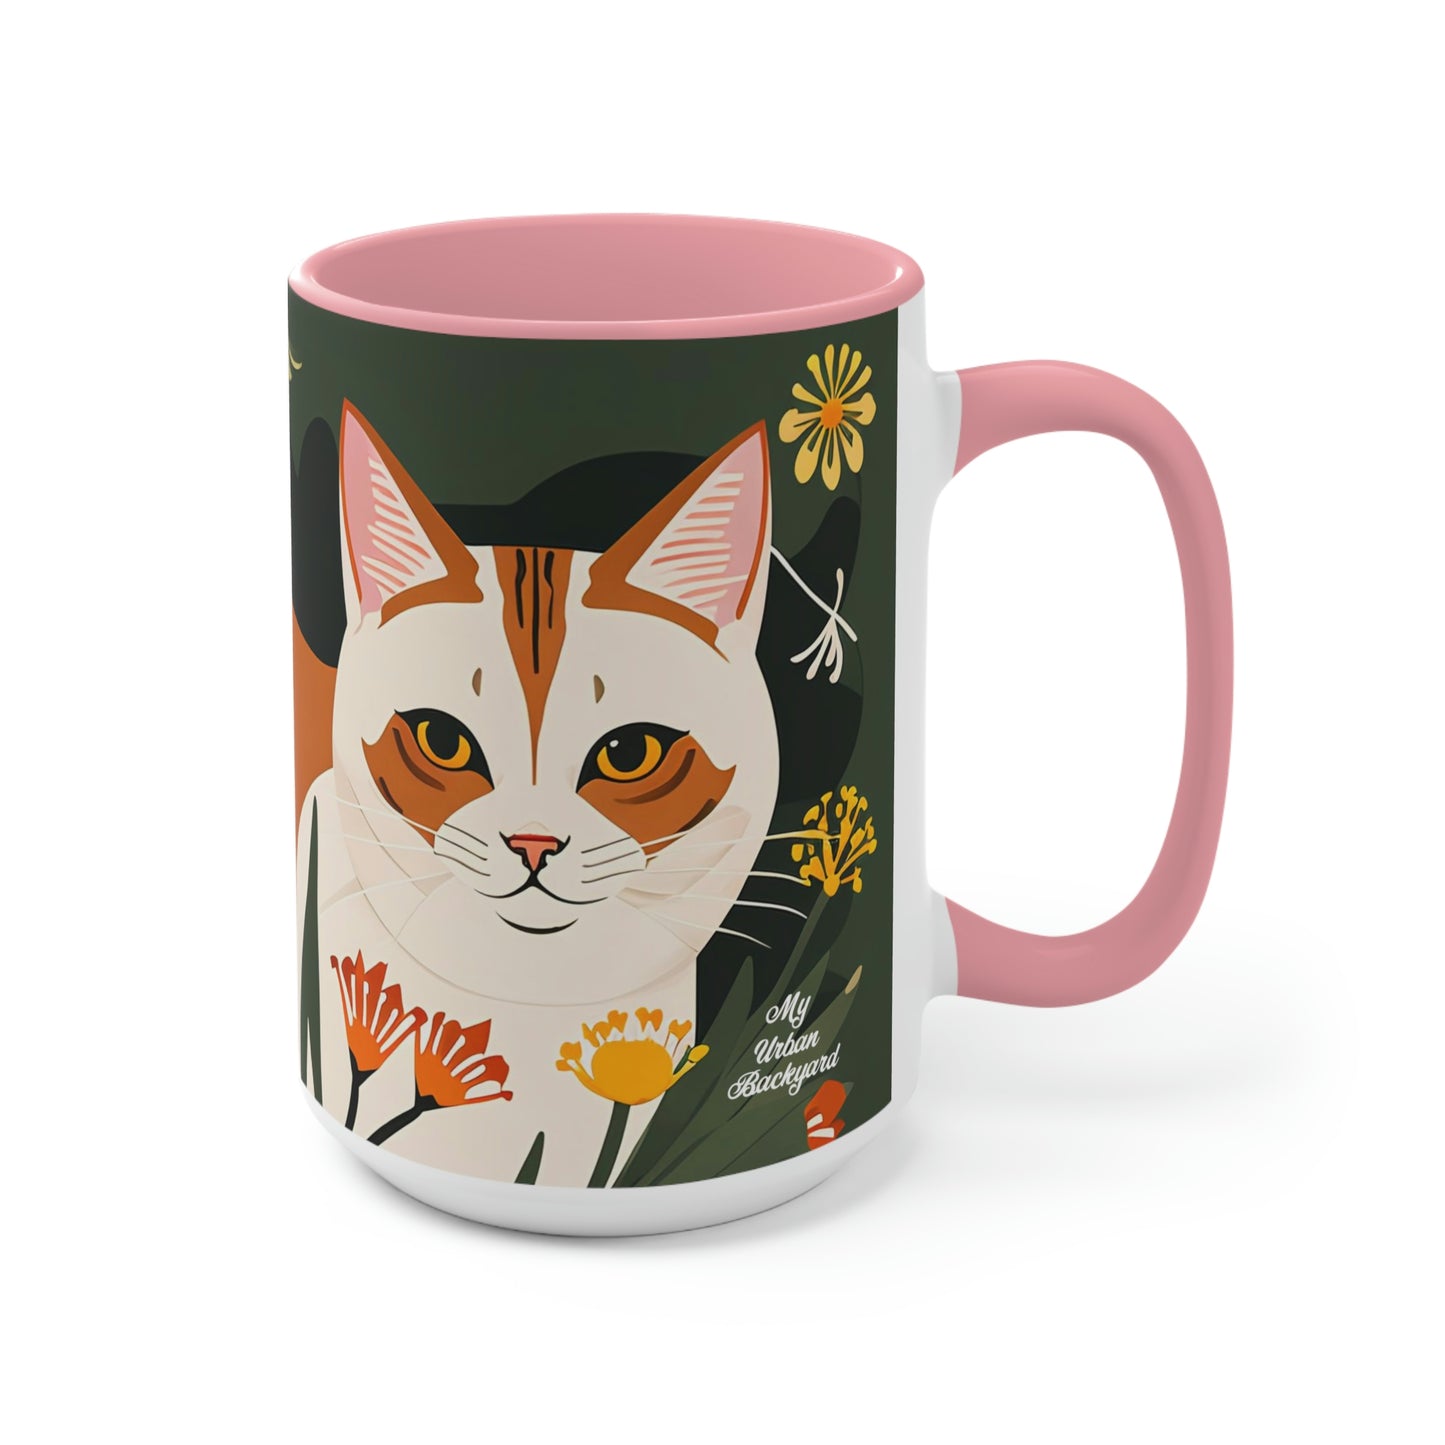 Two Orange and White Cats, Ceramic Mug - Perfect for Coffee, Tea, and More!